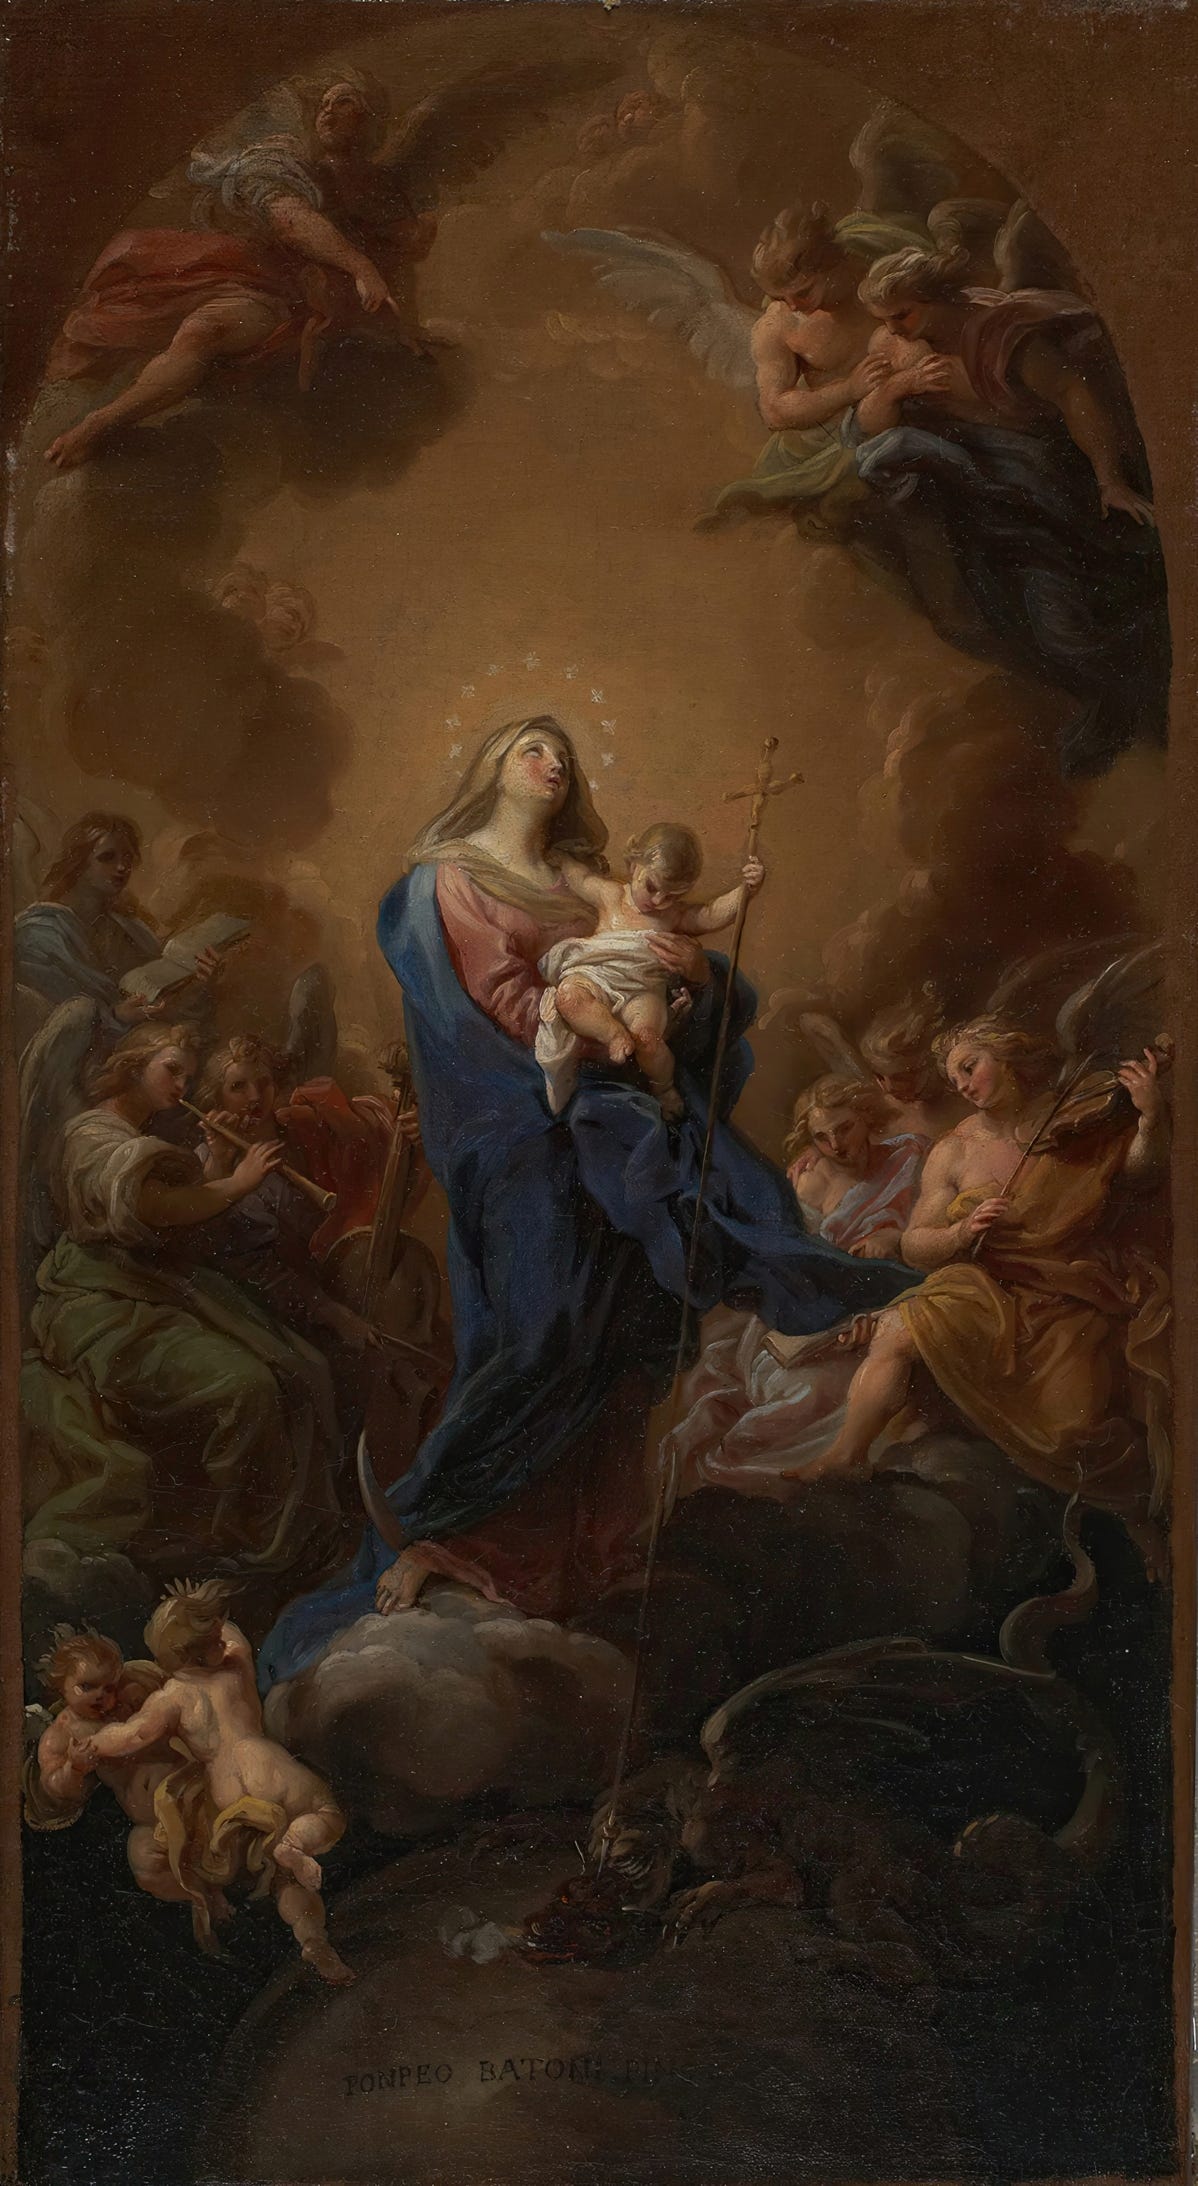 Madonna and Child in Glory (1747) by Pompeo Batoni